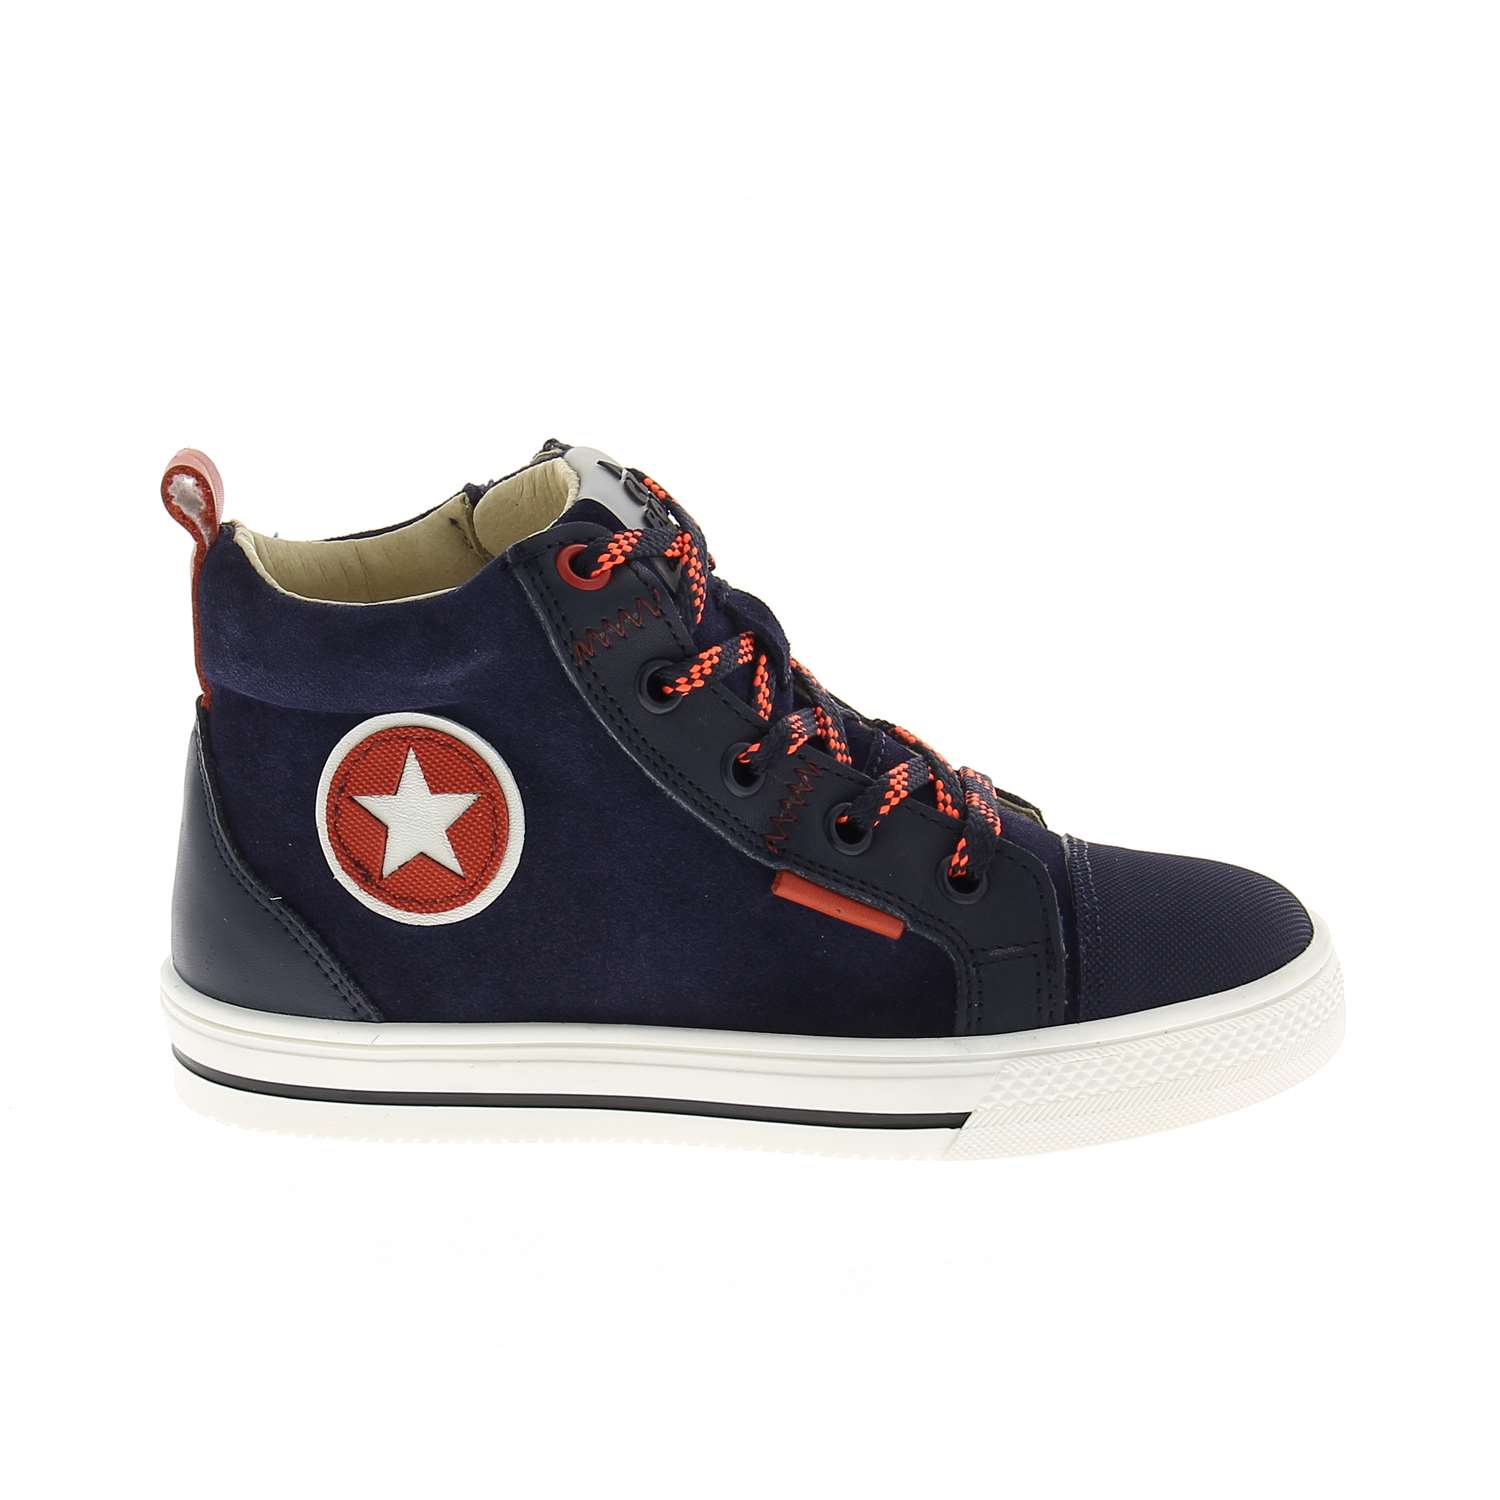 02 - STARLACE -  - Chaussures montantes - Cuir